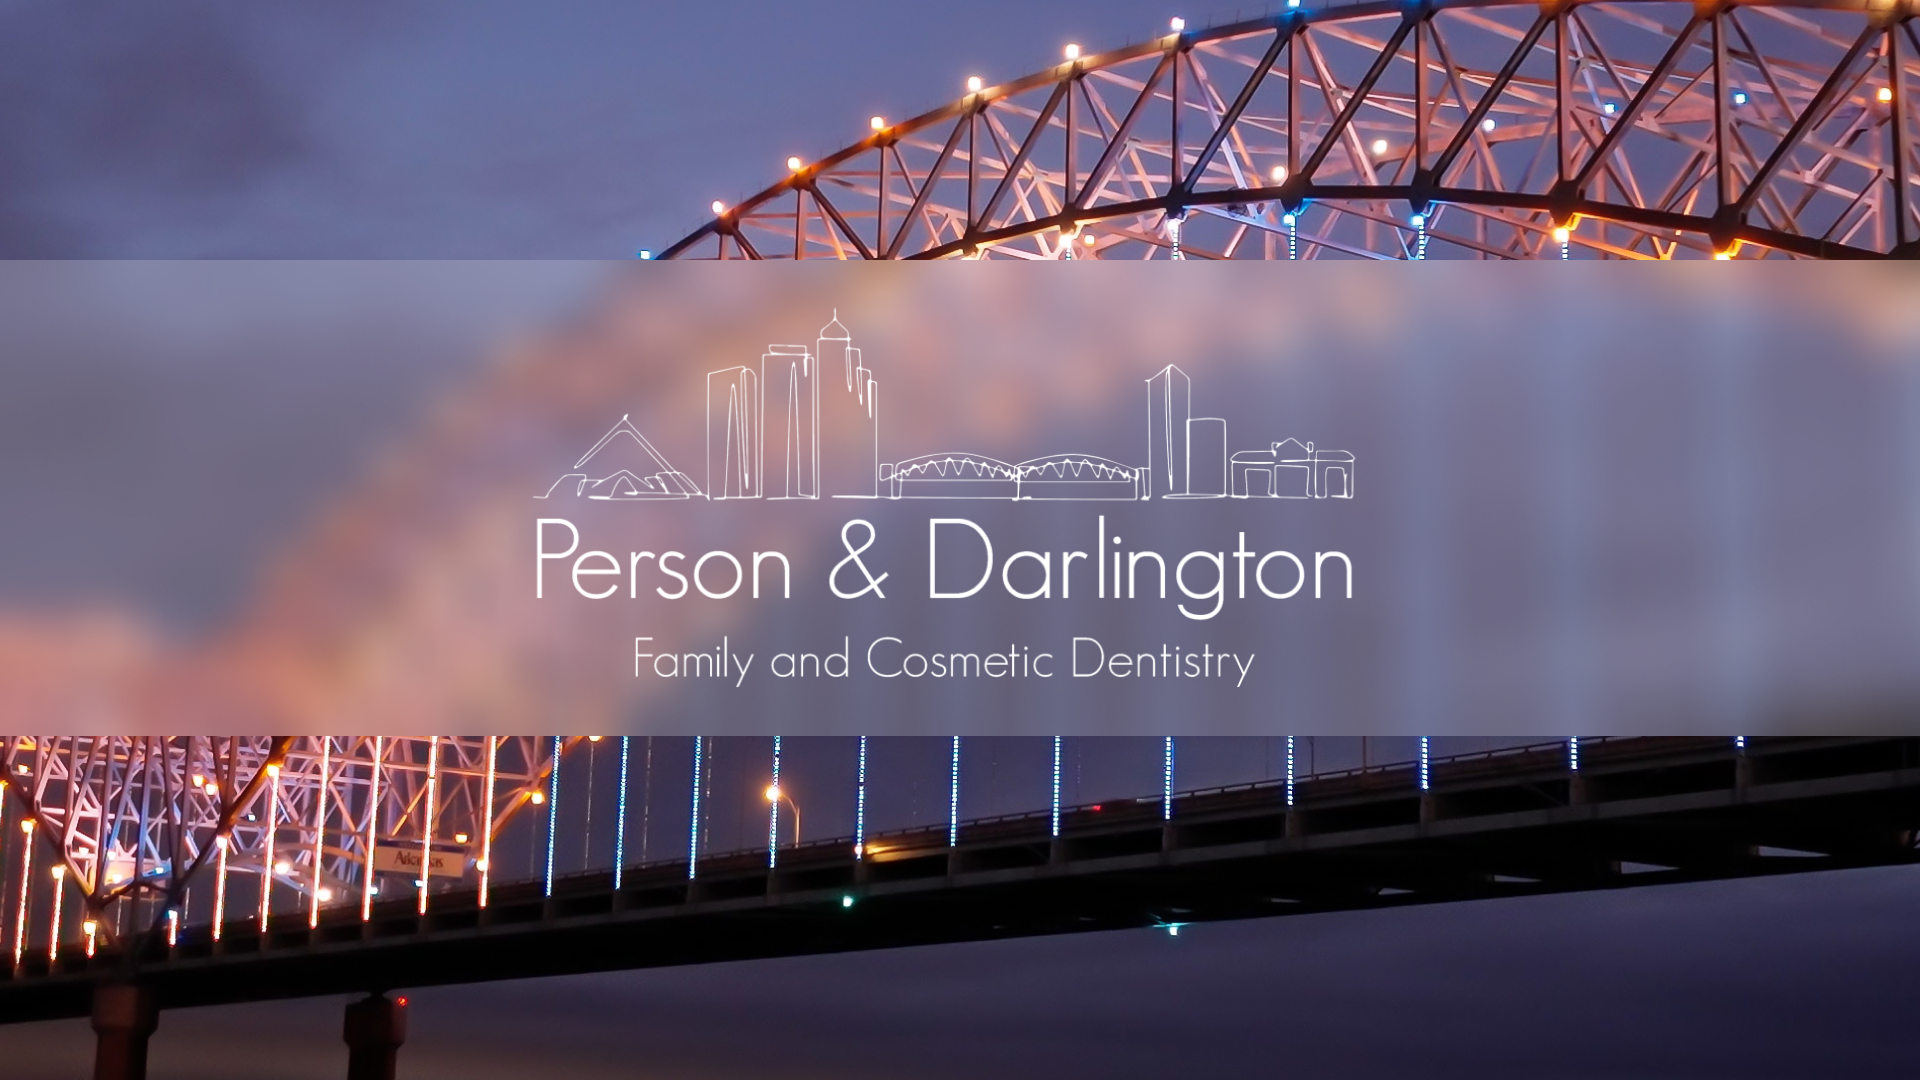 Person & Darlington Family and Cosmetic Dentistry